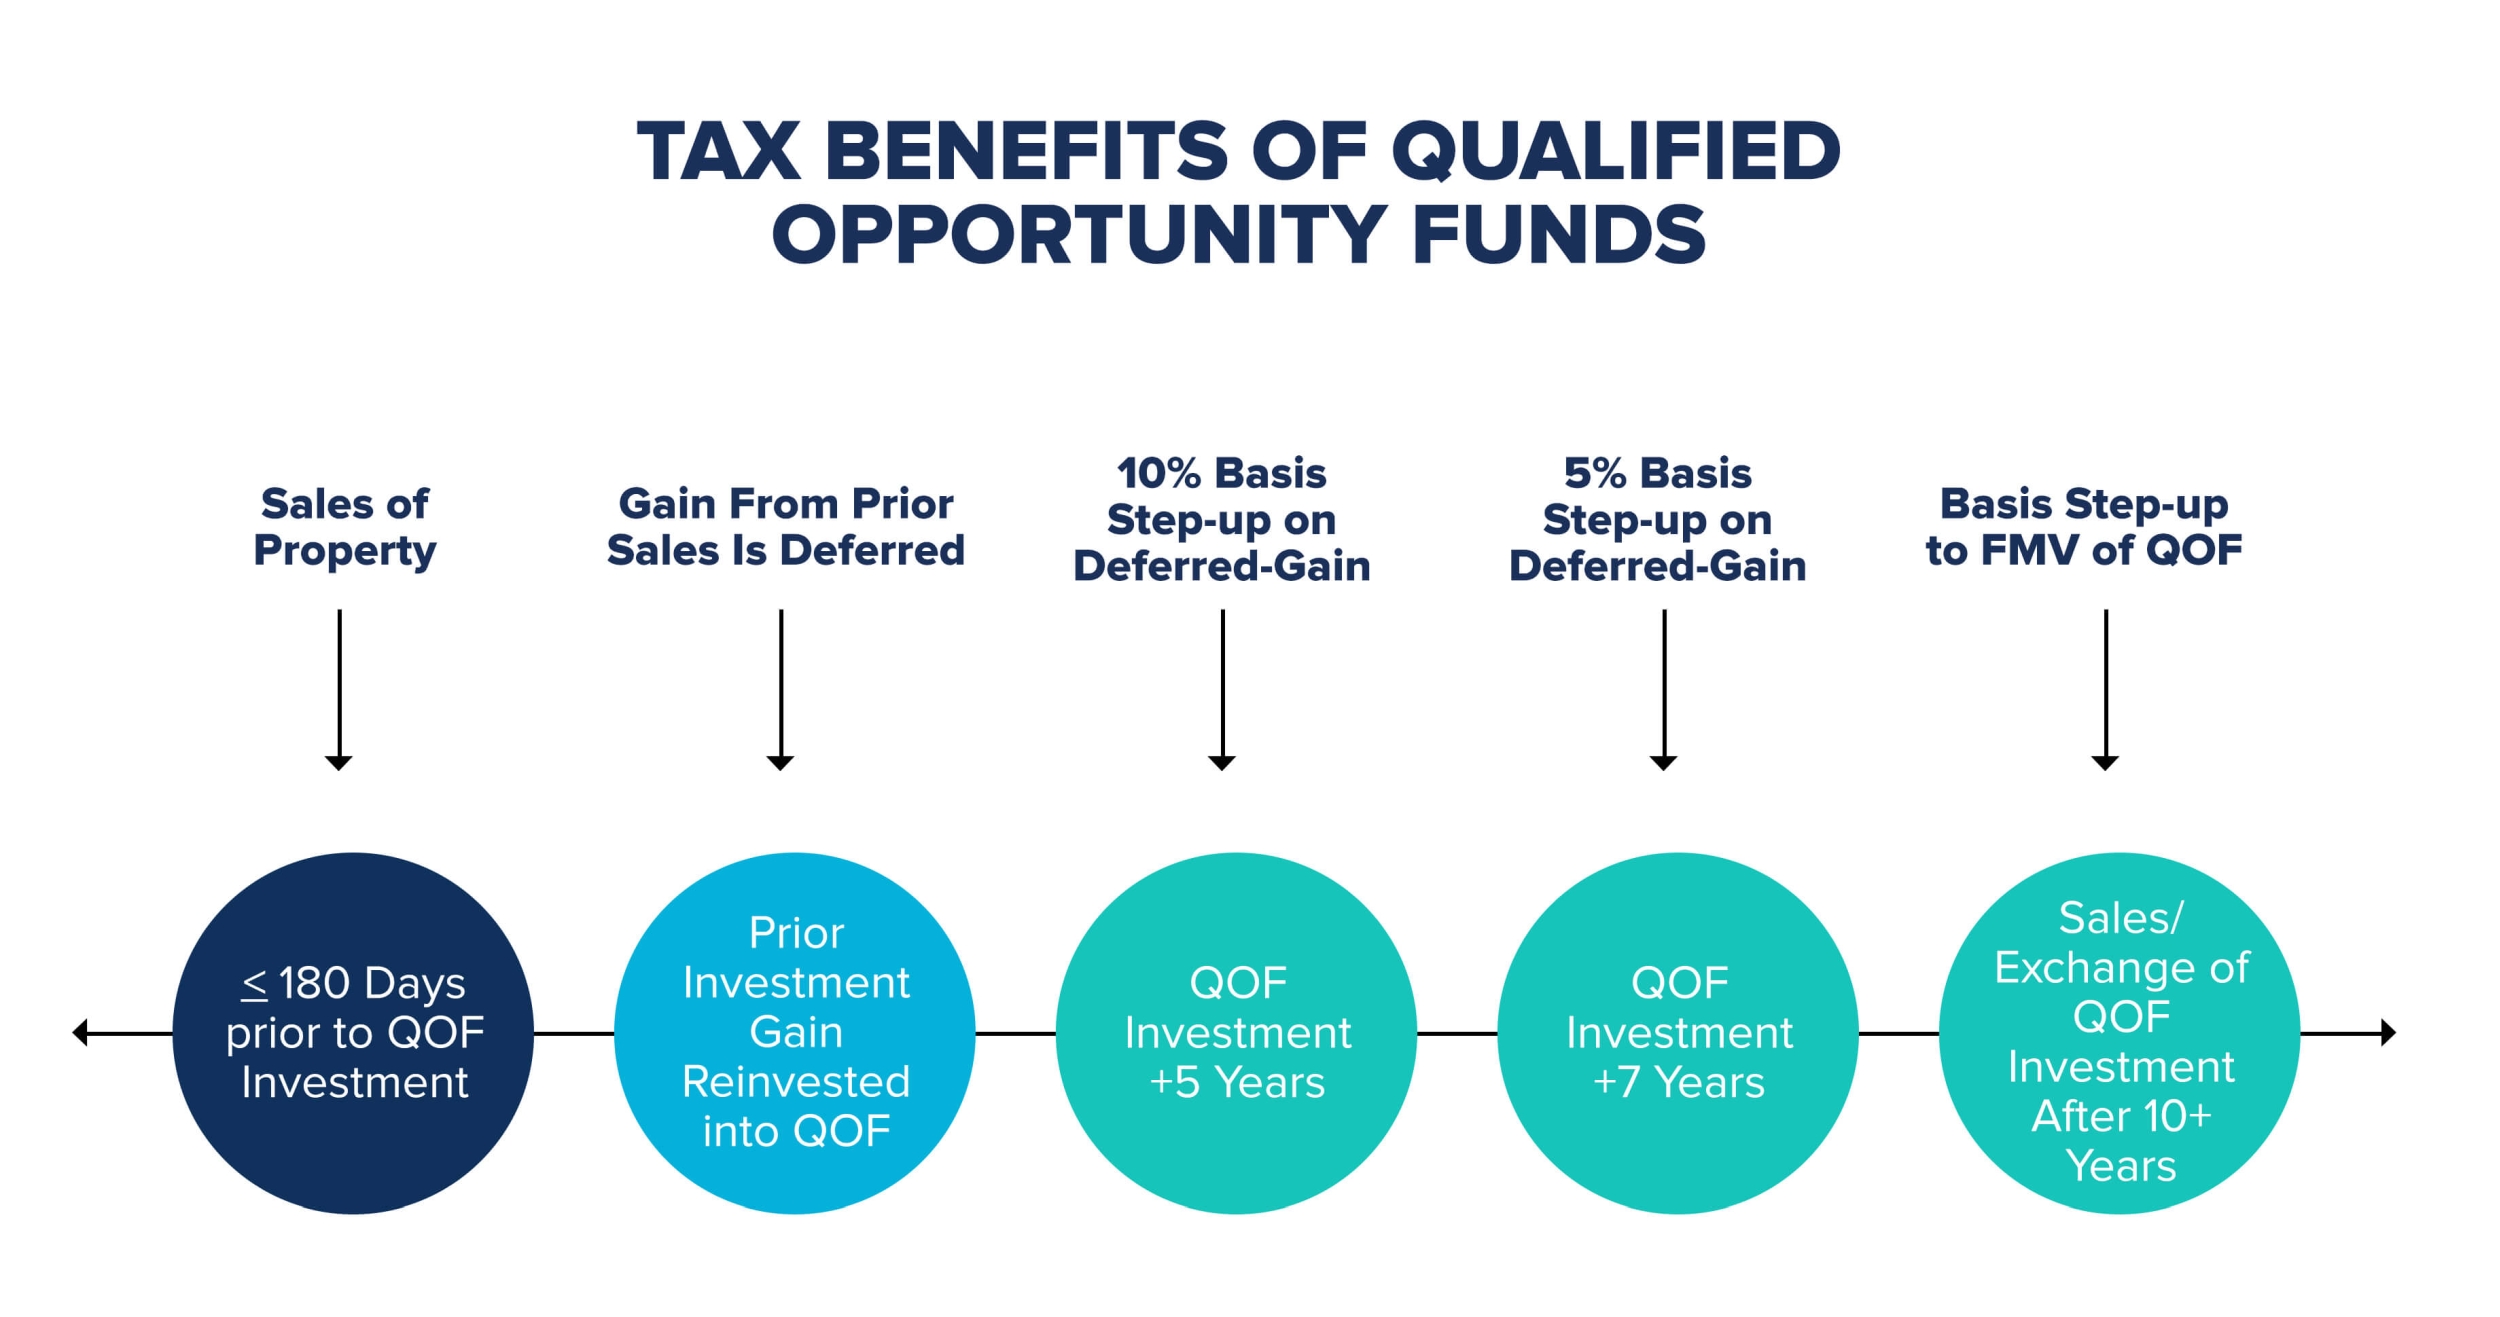 Tax Benefits of Qualified Op-Funds. Timeline from Sales of Property, Reinvestment QOF, +5 years @ 010% step-up on deferred-gain, 5% on 7 year or higher, and exchange/sale after 10+ year (FMV)